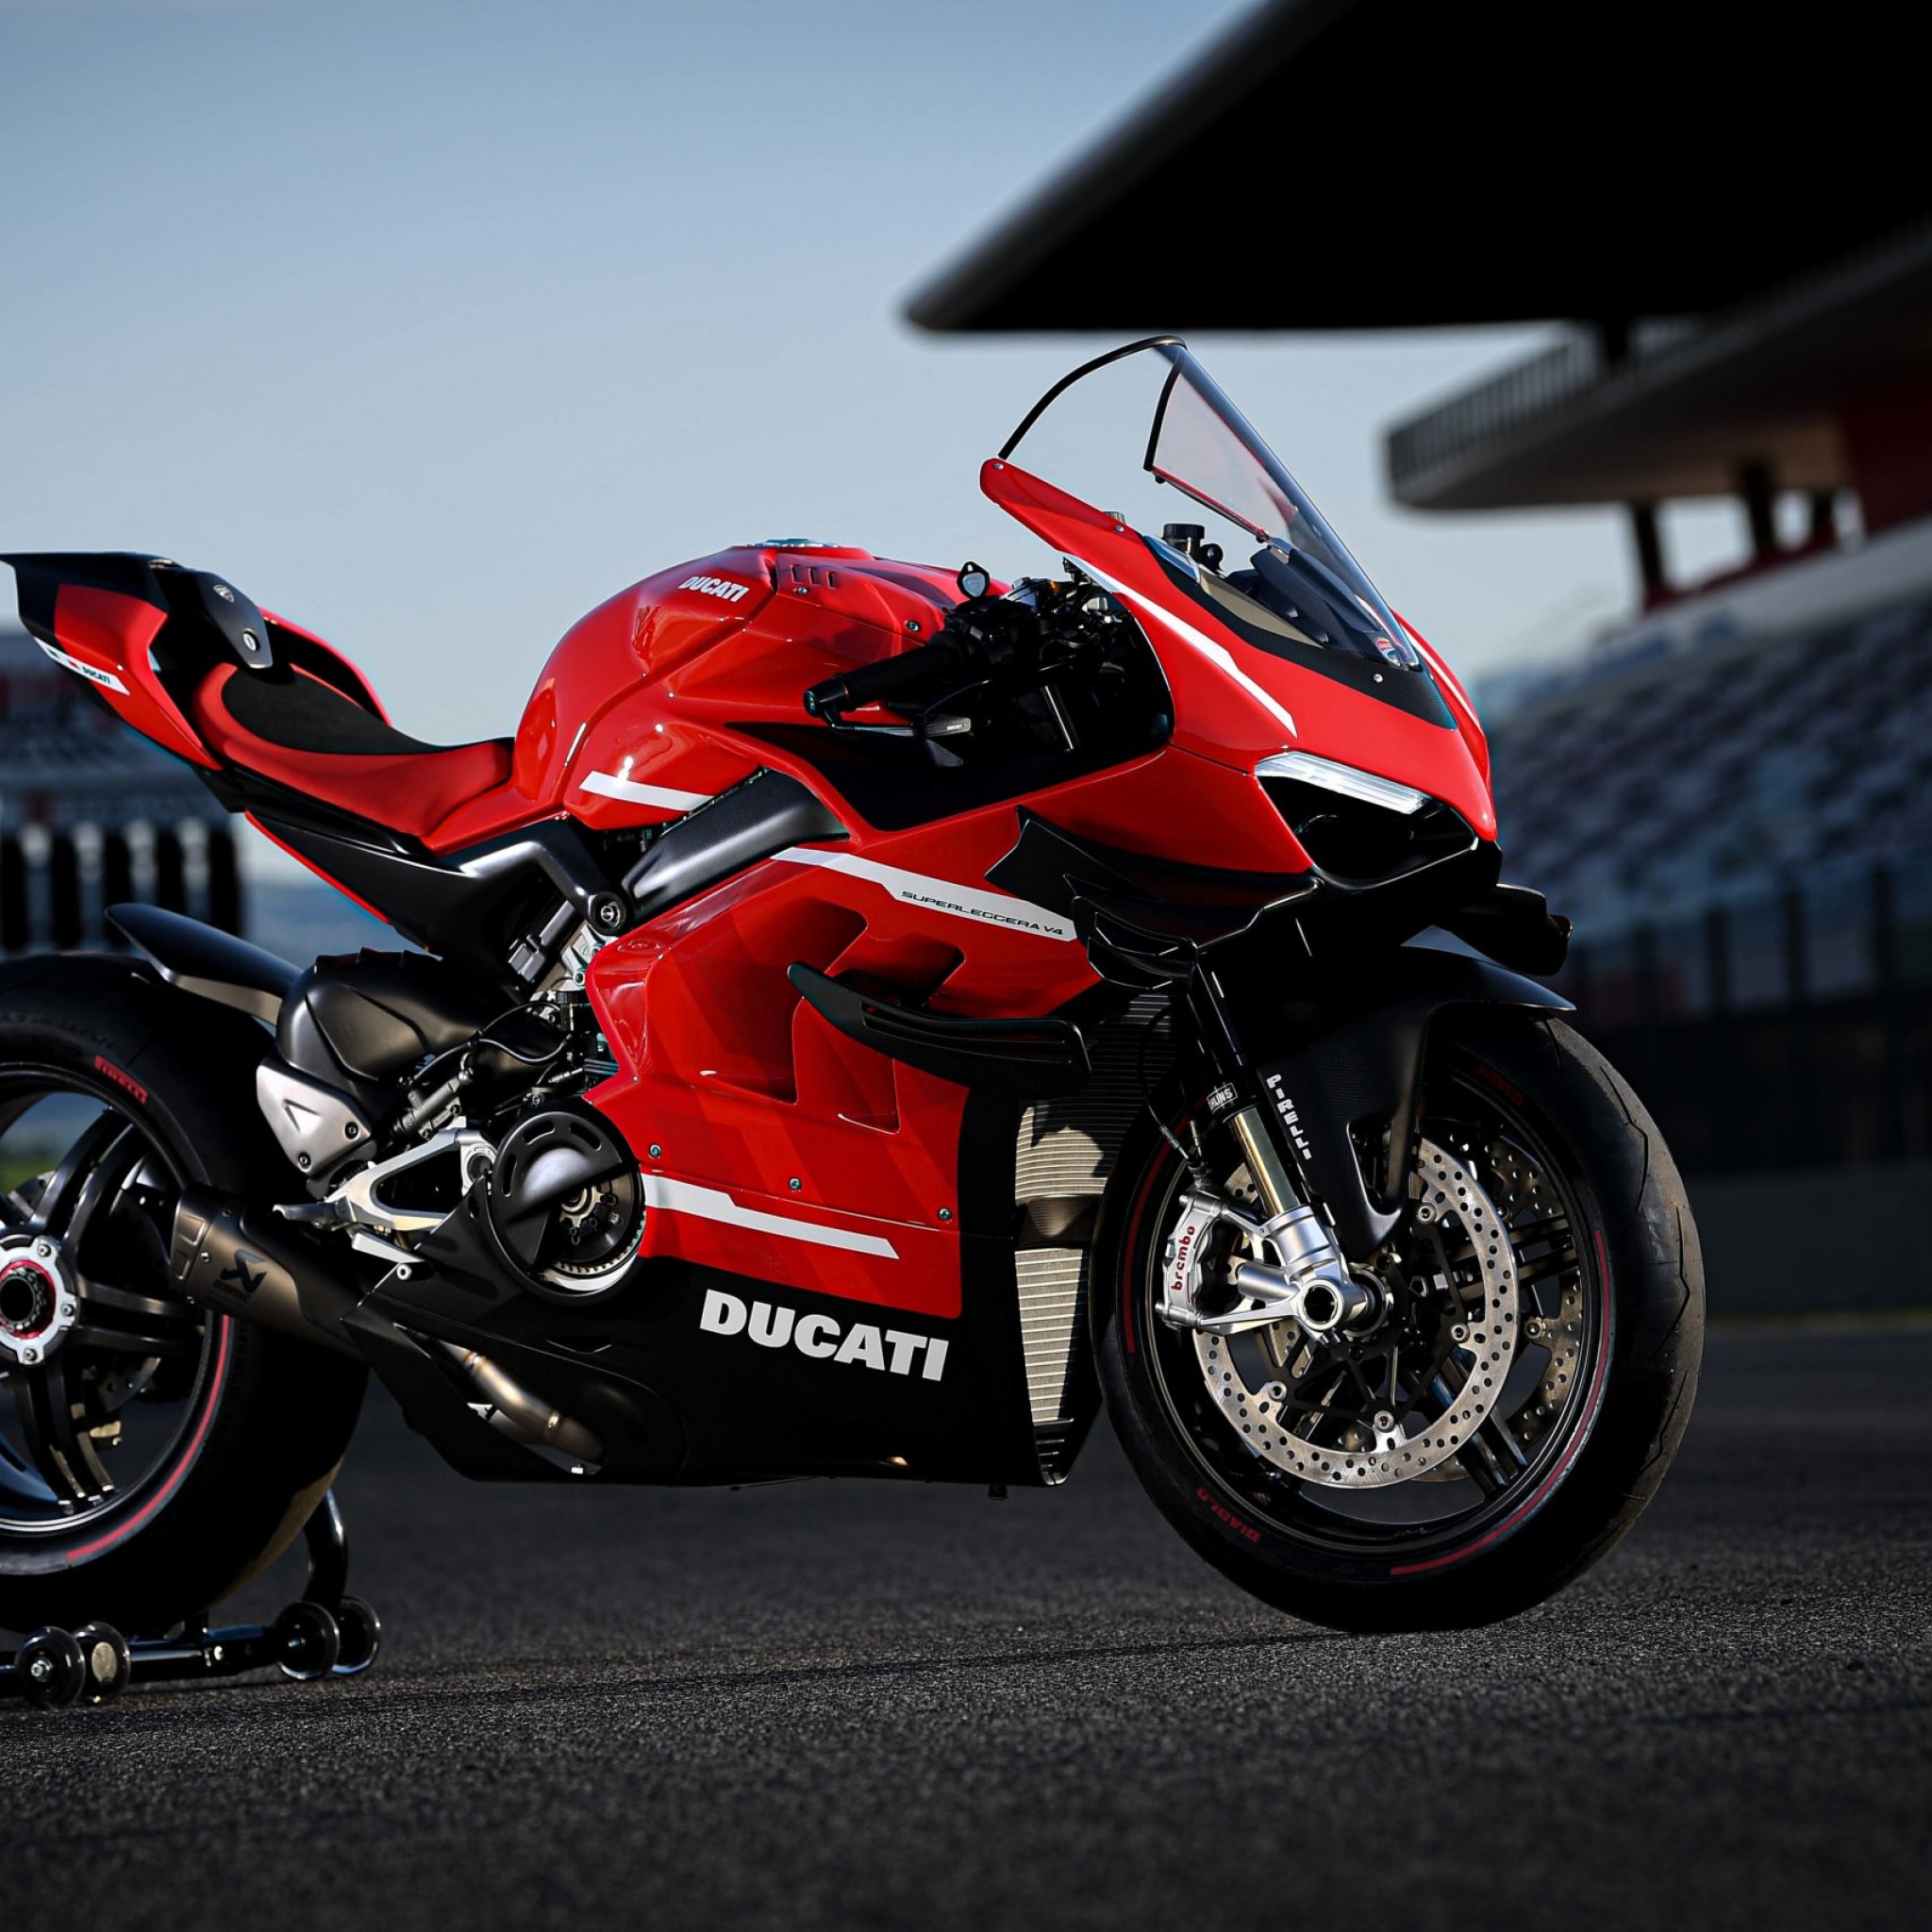 Superbike Racing Wallpapers, HD Superbike Racing Backgrounds, Free Images  Download